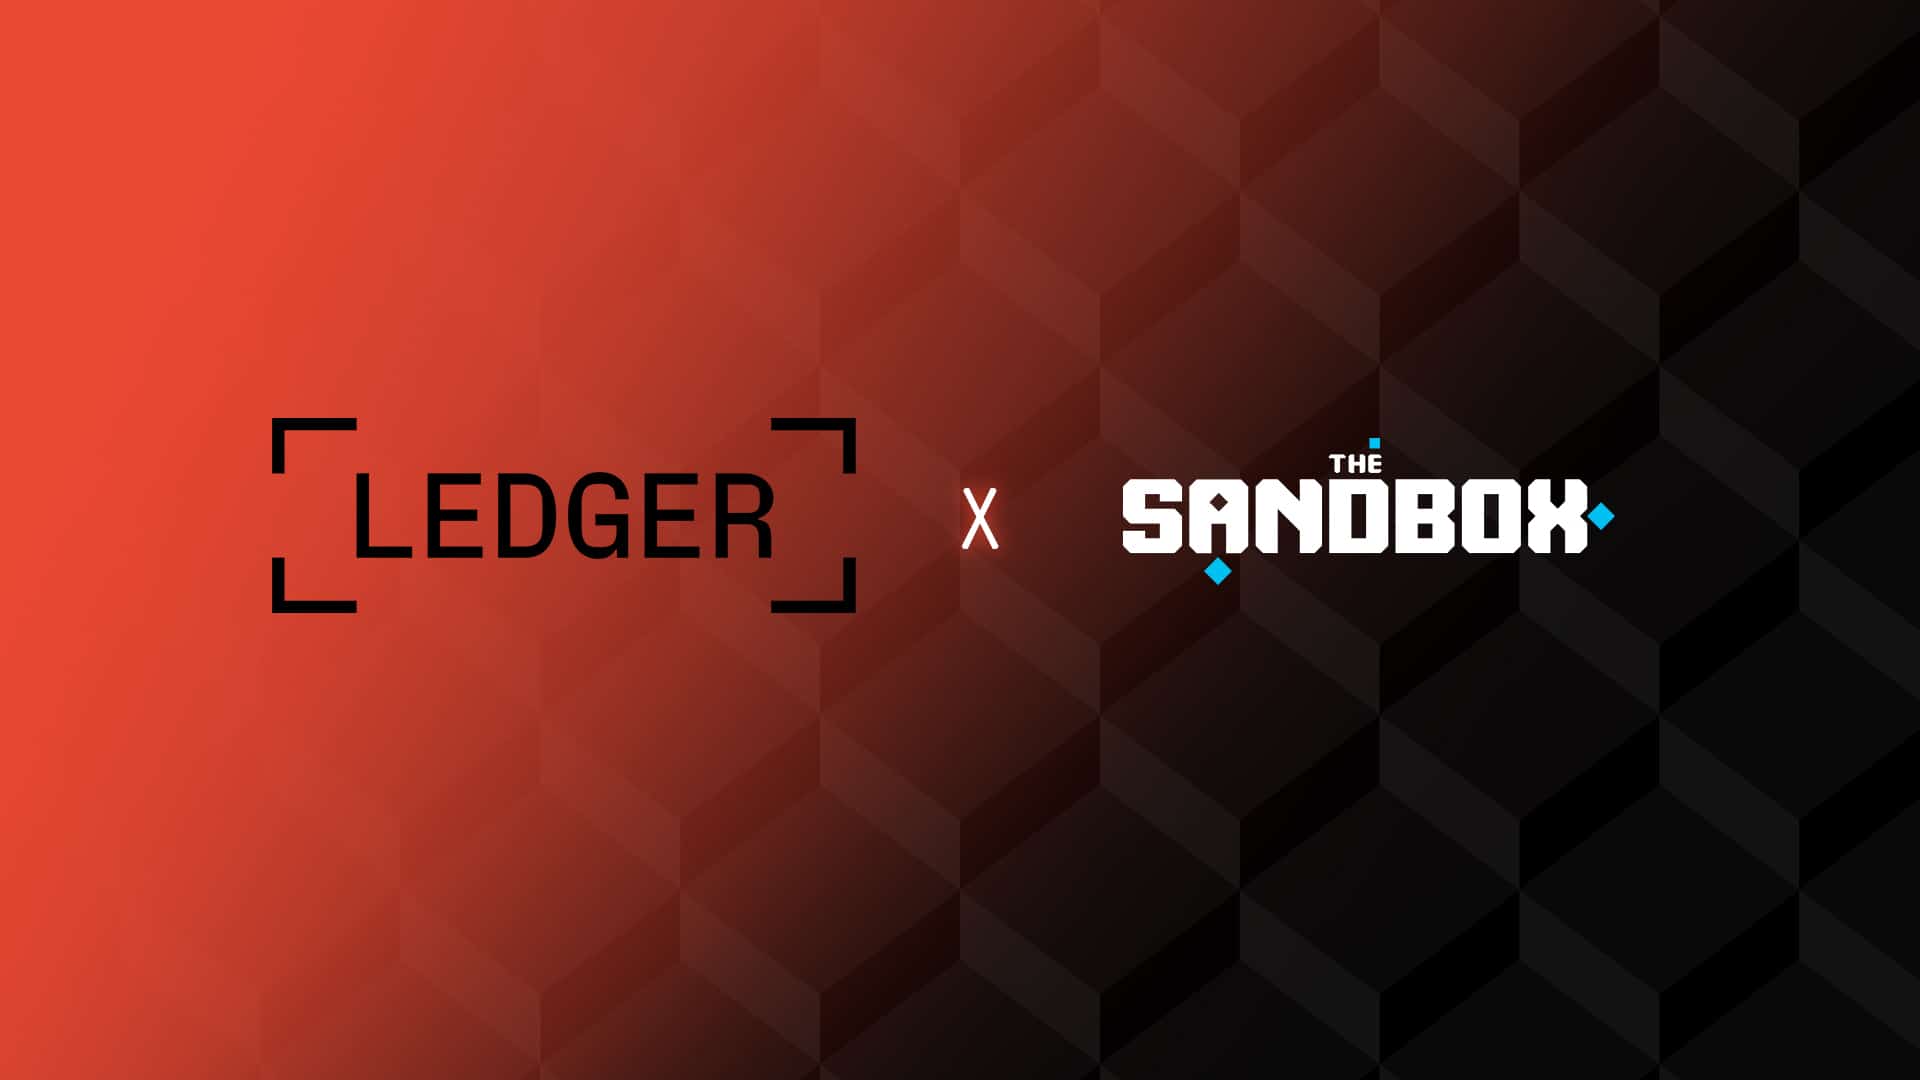 Ledger and The Sandbox Partners to Spread Crypto Education